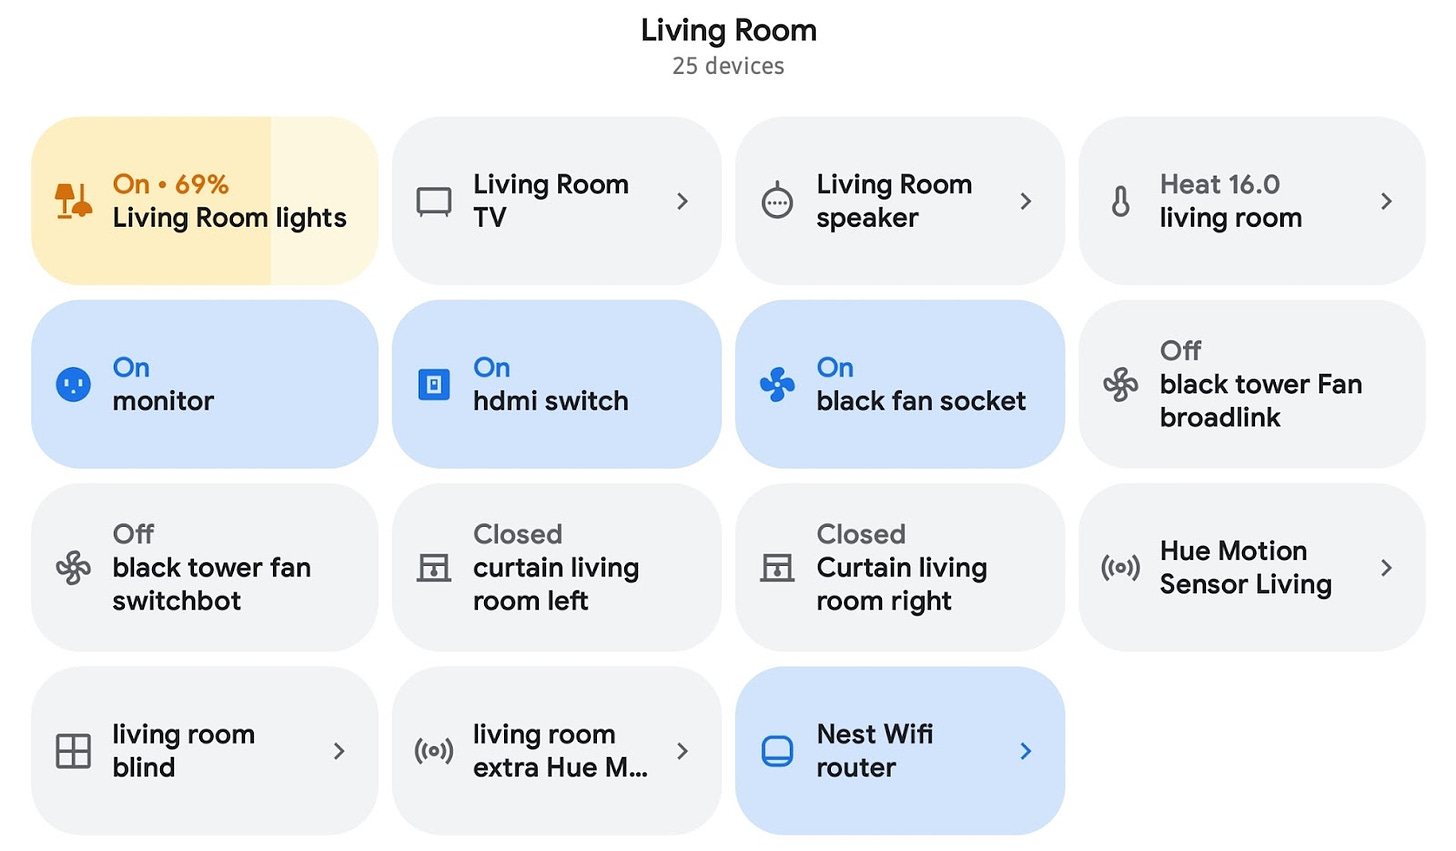 image of a smart home app showing different controls for living room